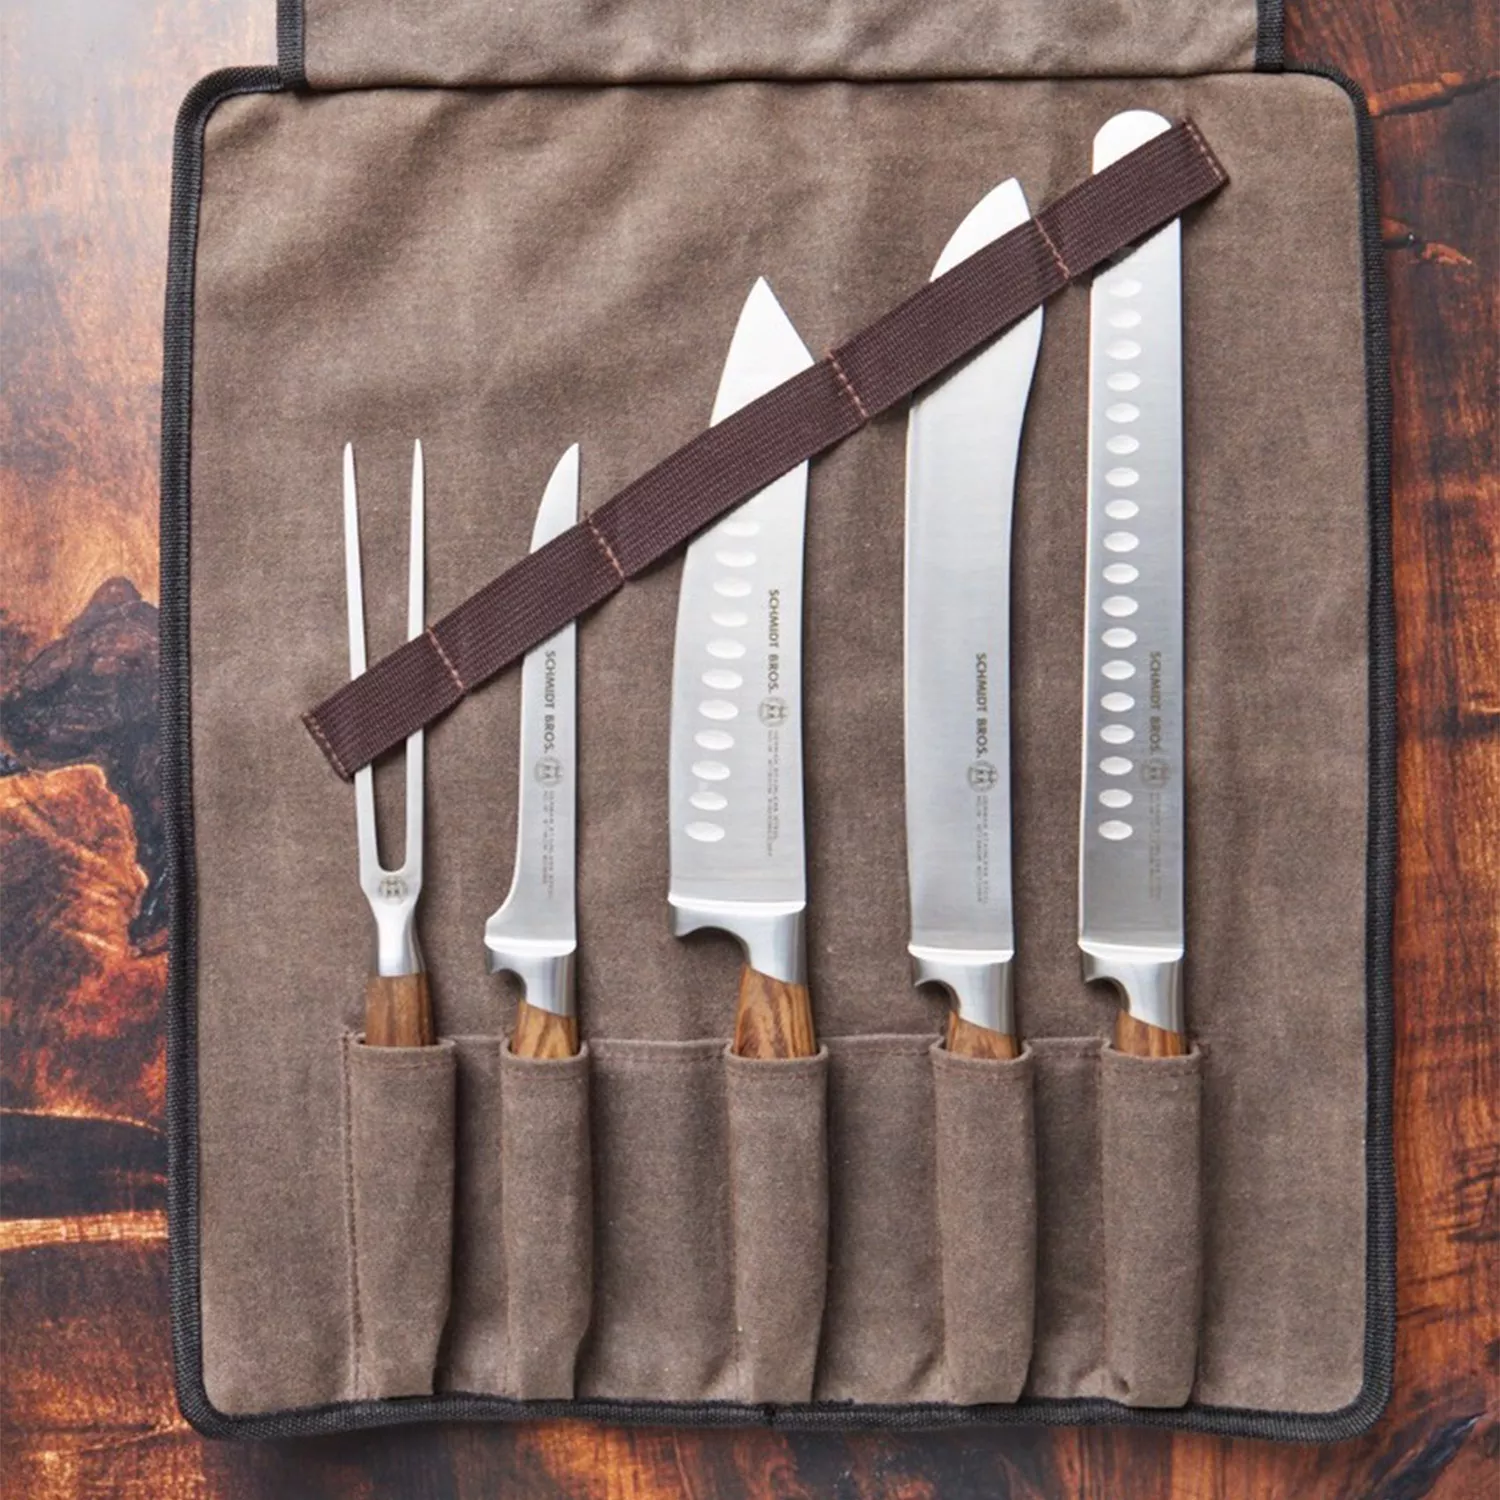 CLASSIC 6-Piece Knife Set with Magnet Bar